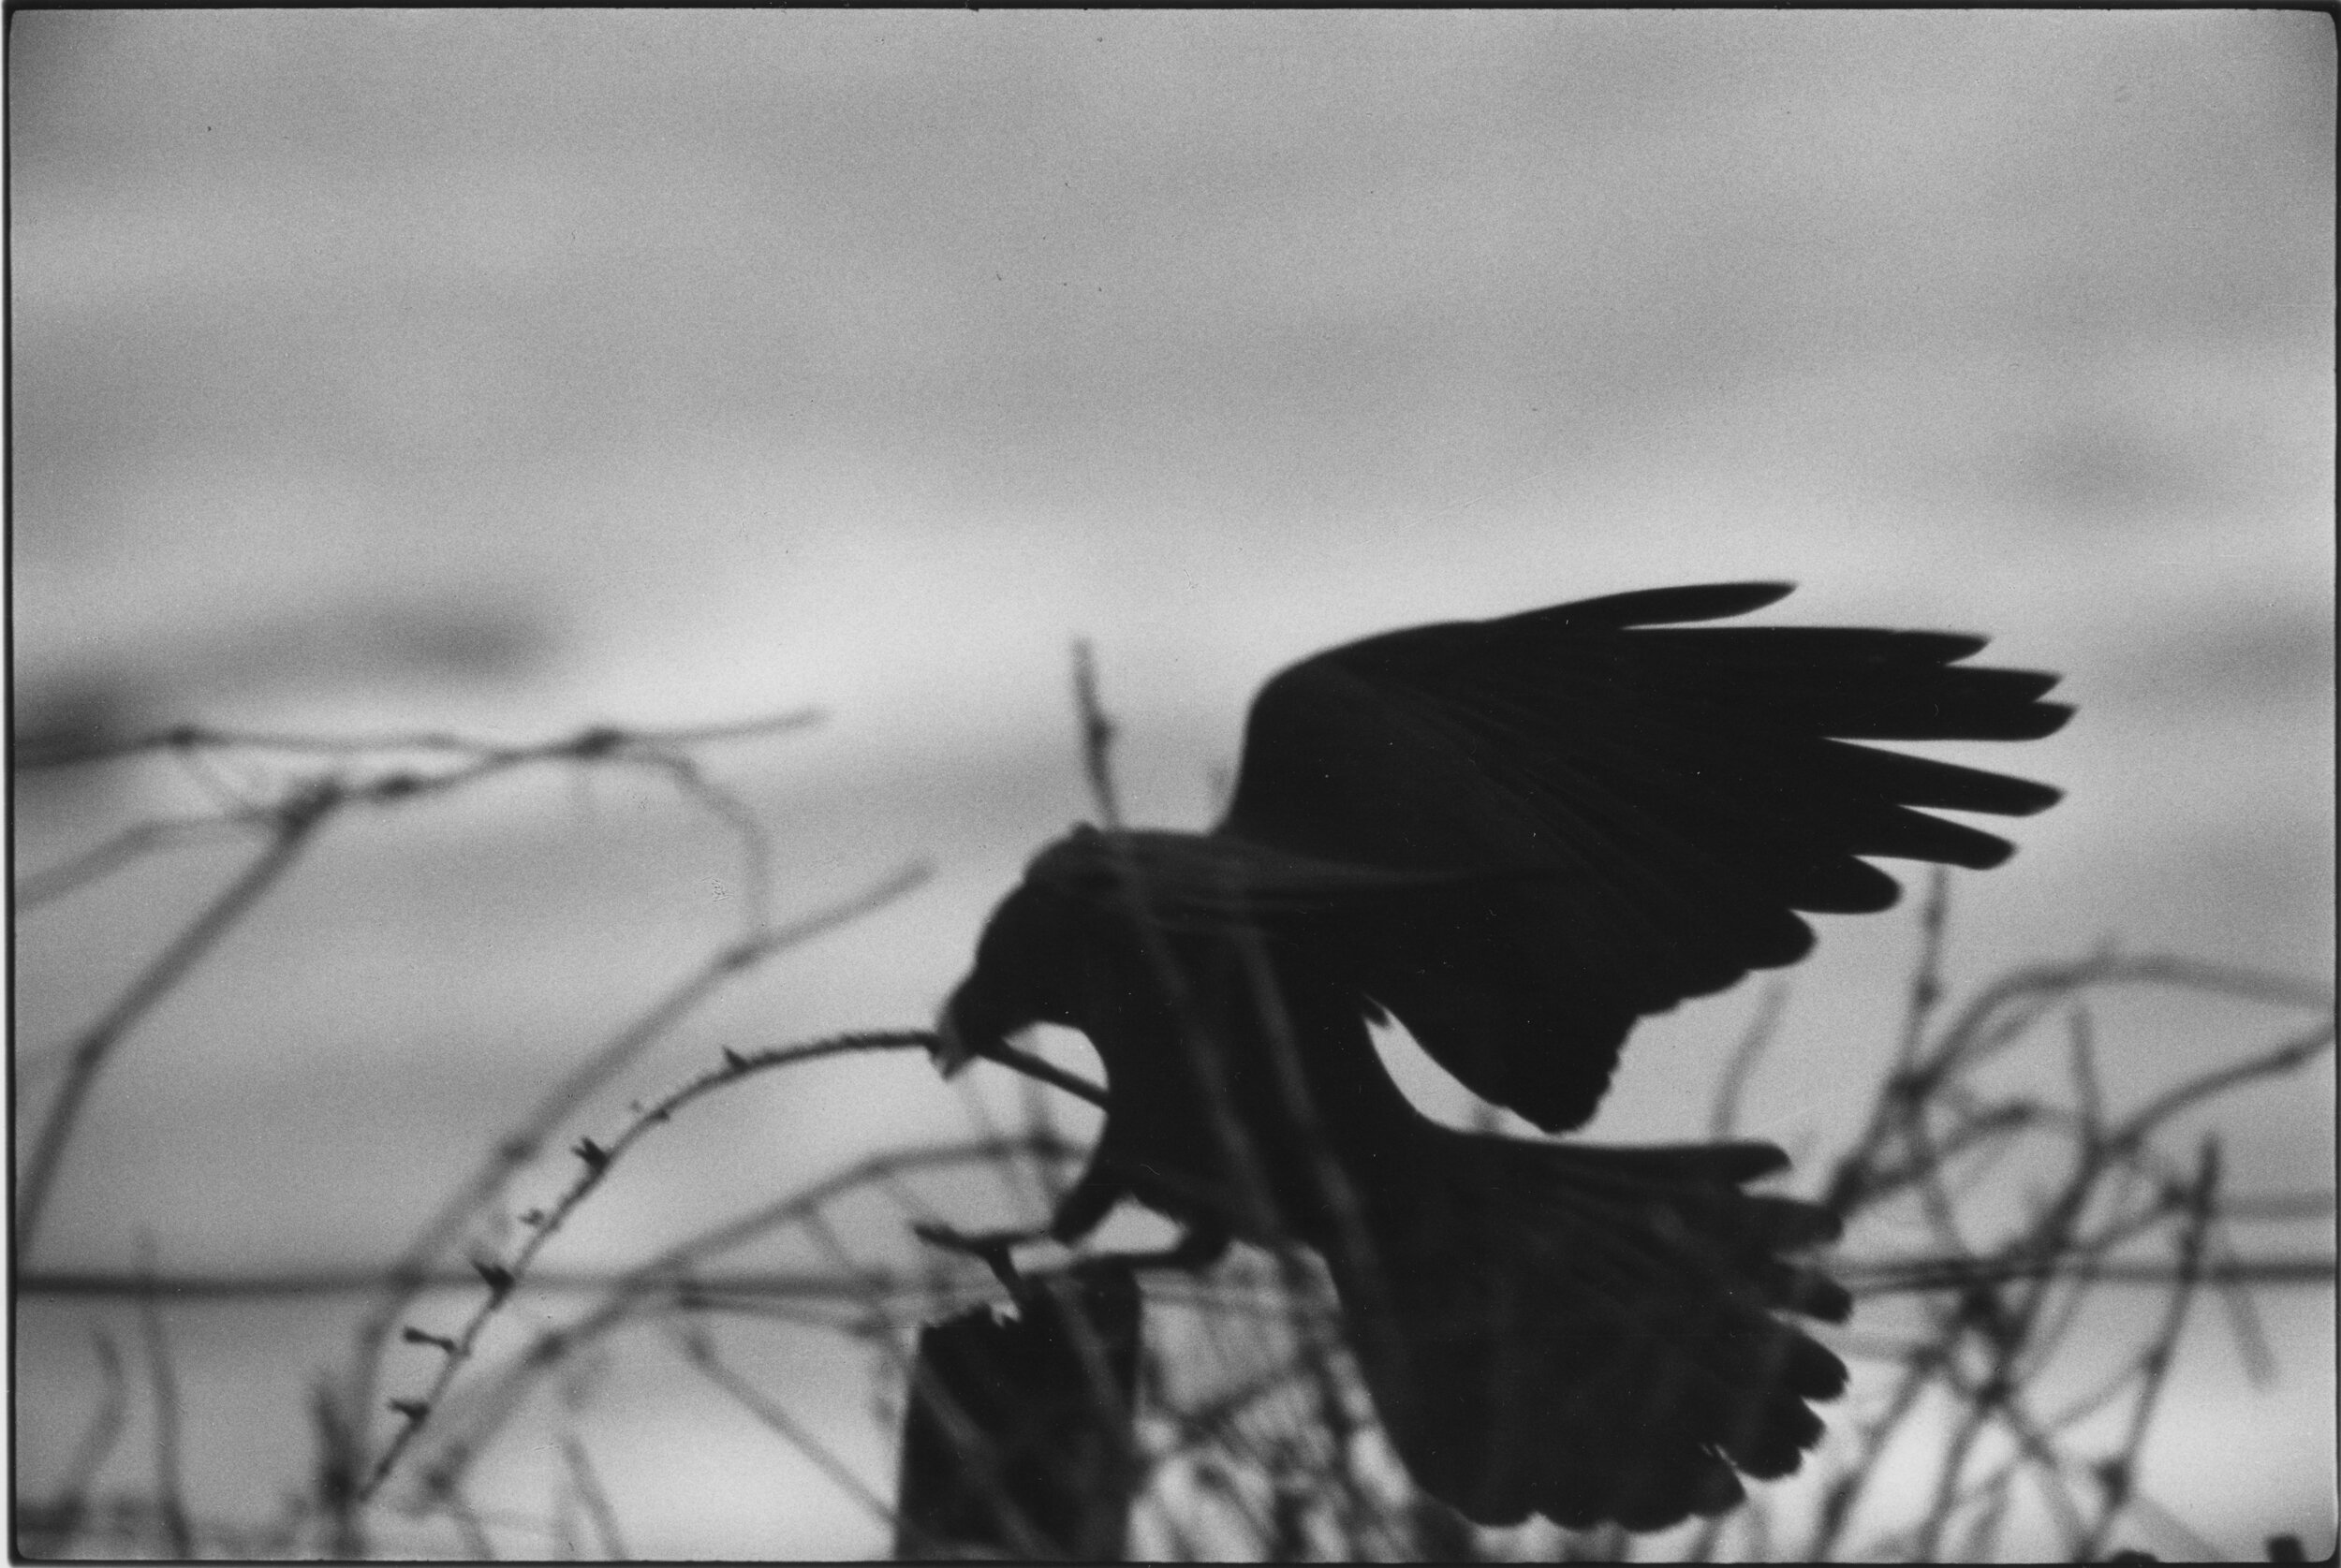 Untitled, from the Solitude of Ravens, 1977